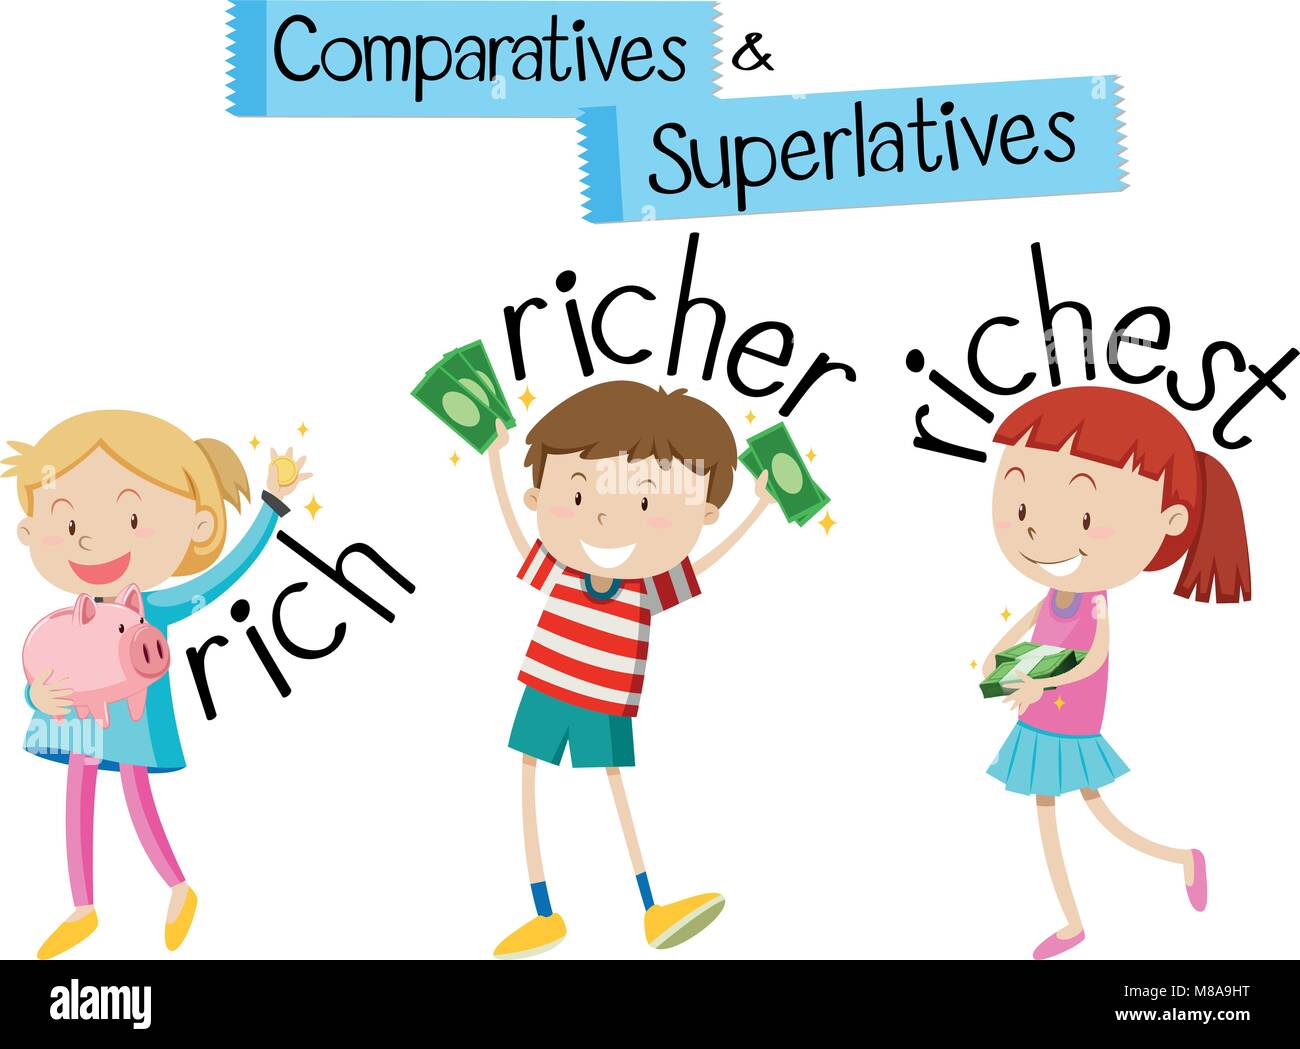 english-grammar-for-comparatives-and-superlatives-with-kids-and-word-rich-illustration-stock